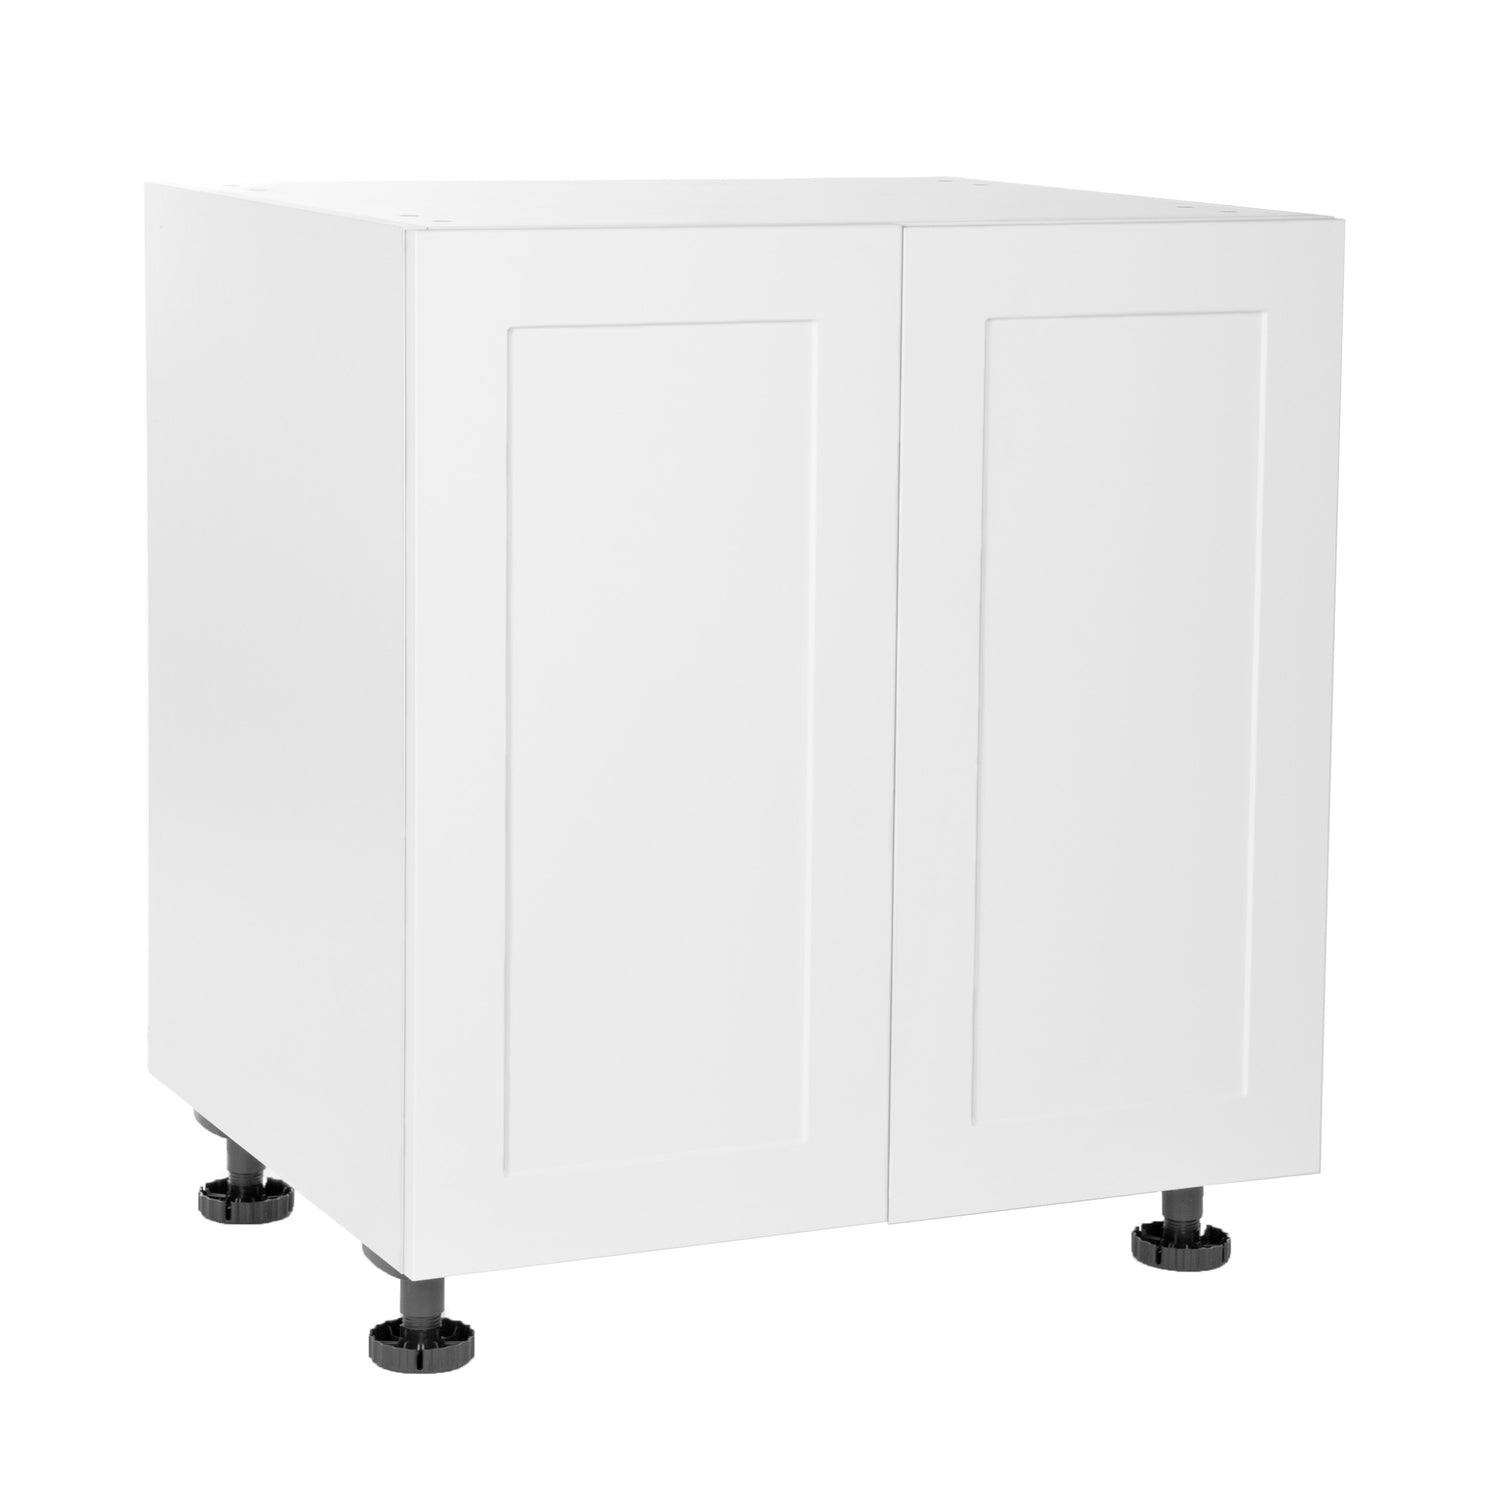 Quick Assemble Modern Style with Soft Close, White Shaker Base Kitchen Cabinet, 2 Door (30 in W x 24 in D x 34.50 in H) -  Pro-Edge HD